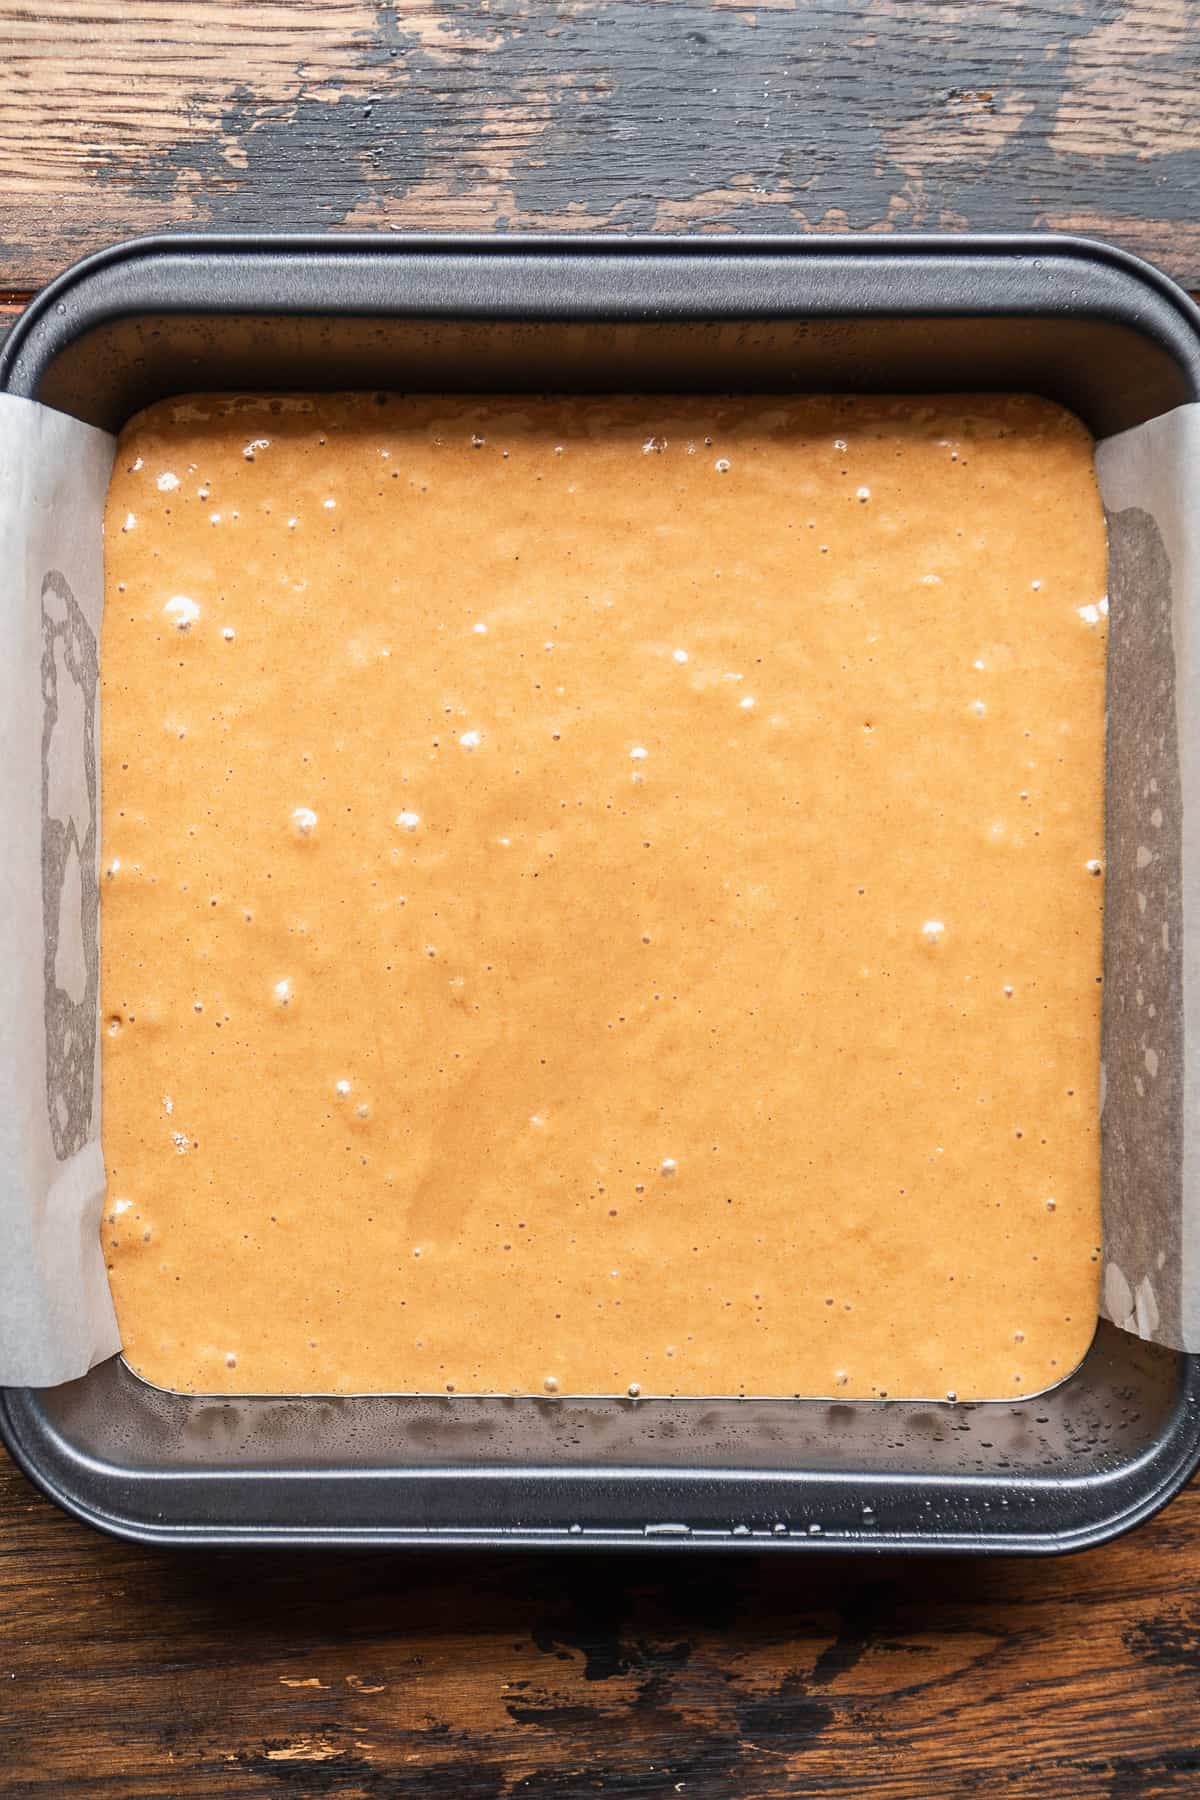 Oat flour cake batter in a square cake pan.